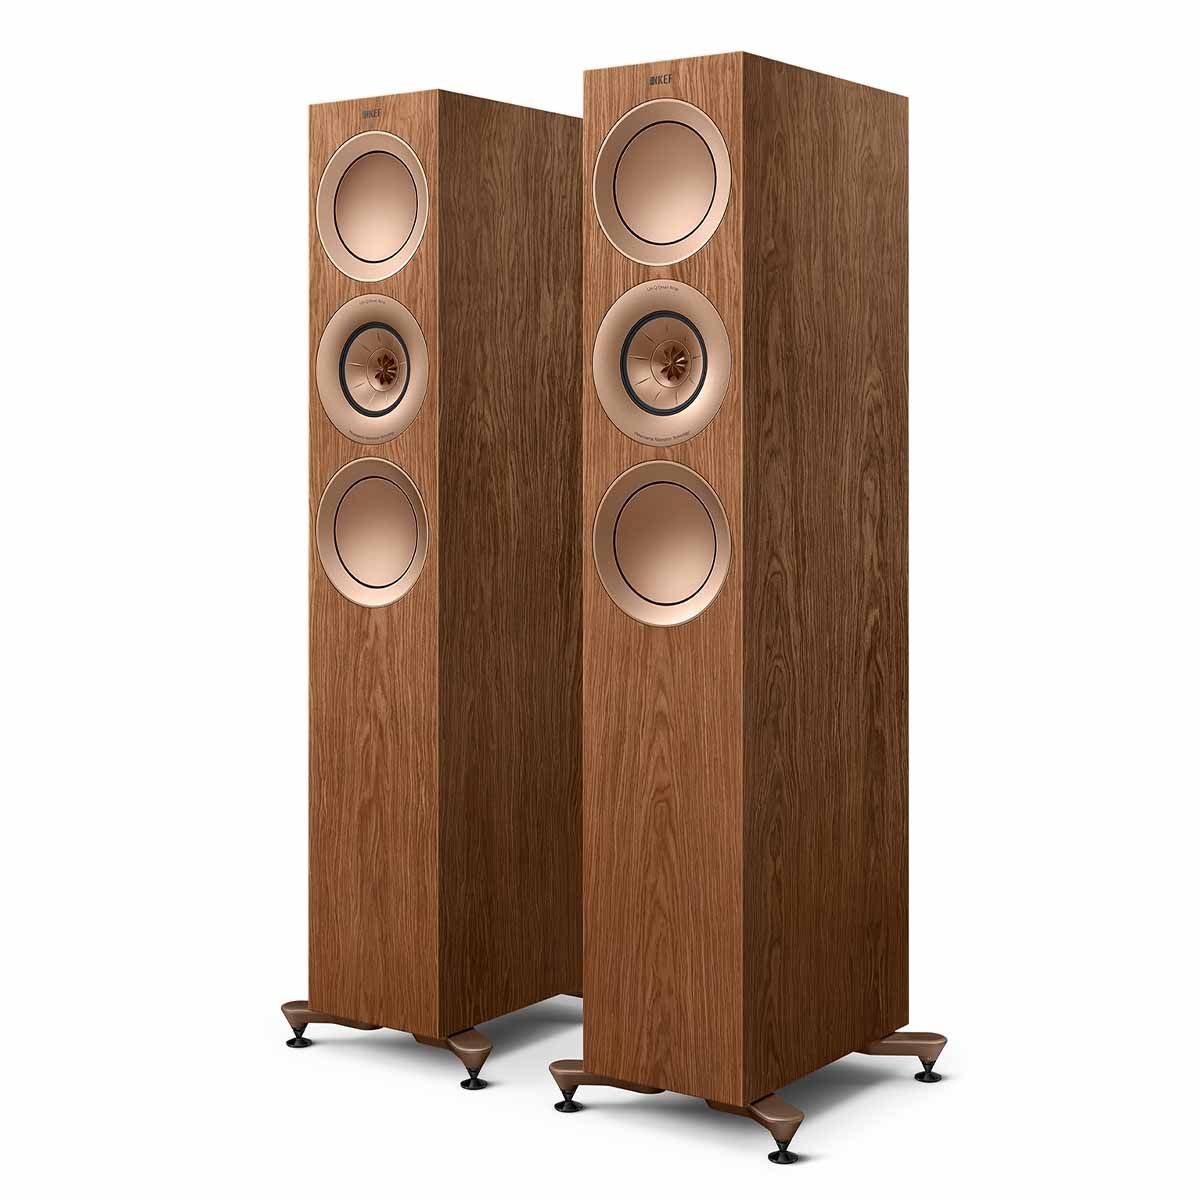 KEF R7 Meta Tower Speaker - walnut angled front view of pair without grilles